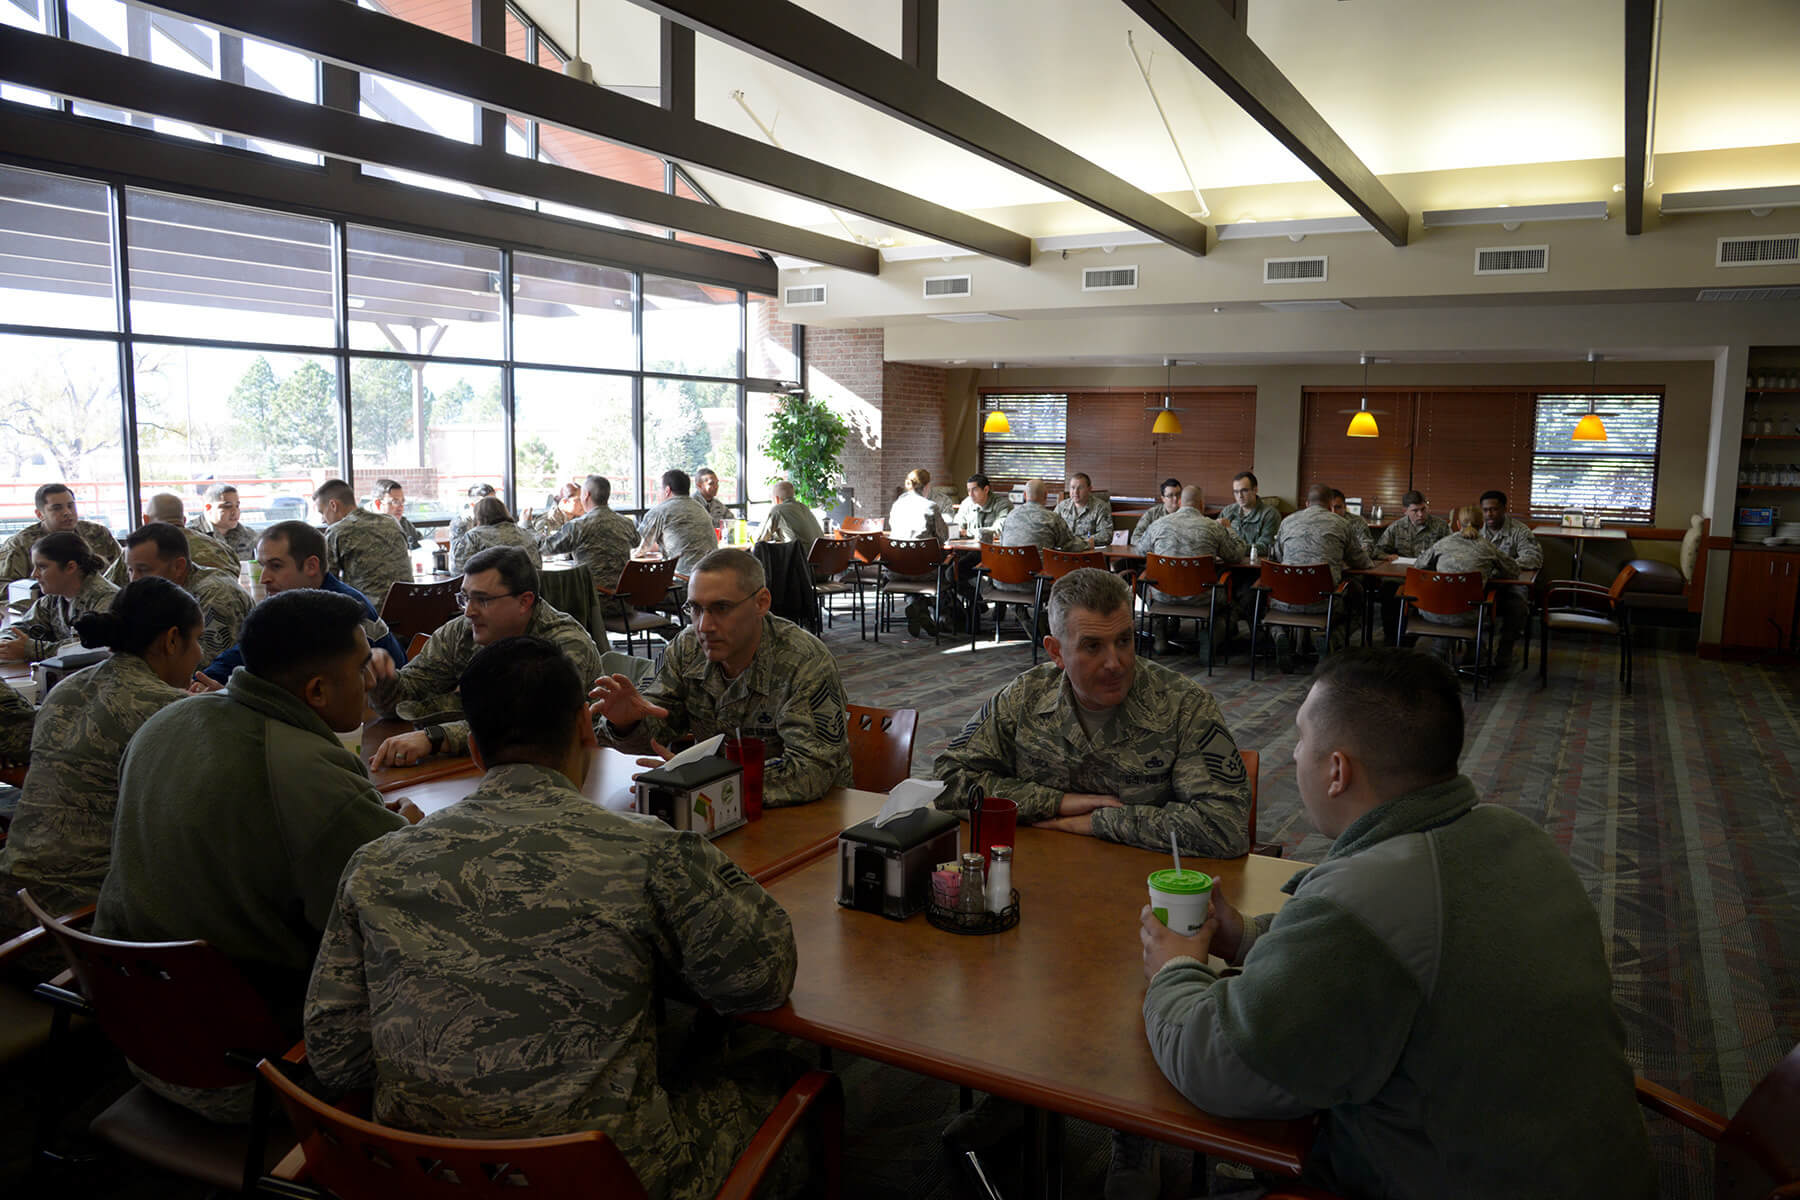 Reserve Citizen Airmen from the 302nd Maintenance Group meet with senior leaders during a speed mentoring session at Peterson Air Force Base, Colorado to opportunity to discuss professional development opportunities. Photo by Staff Sgt. Tiffany Lundberg.